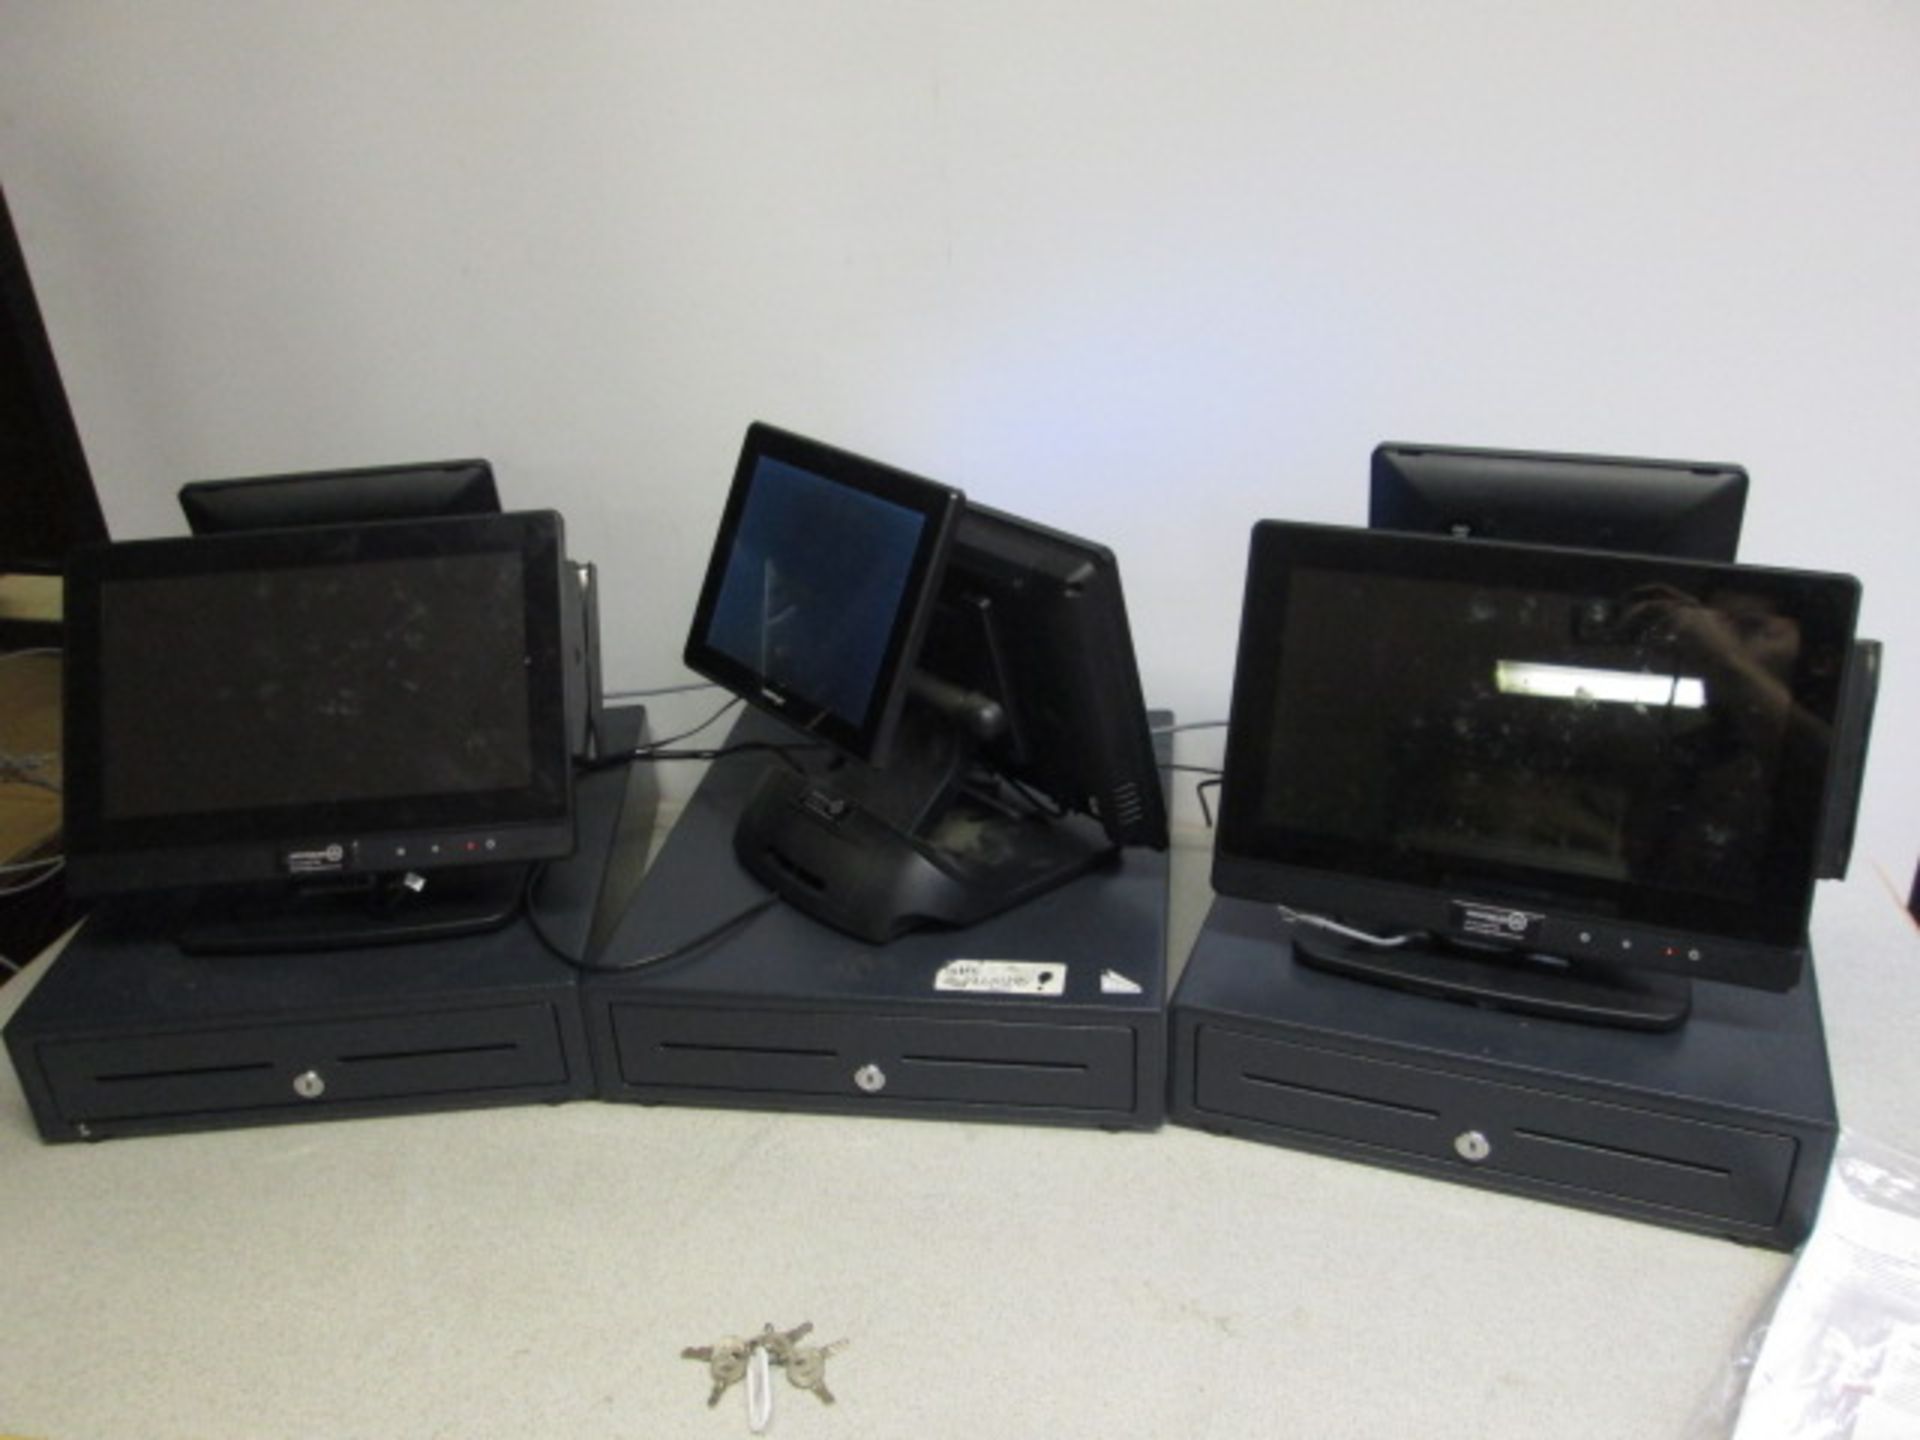 Epos System to Include: 3 x Dual Screen Posiflex LCD Touchscreen Terminals (Model XT-3114 ) with - Image 11 of 13